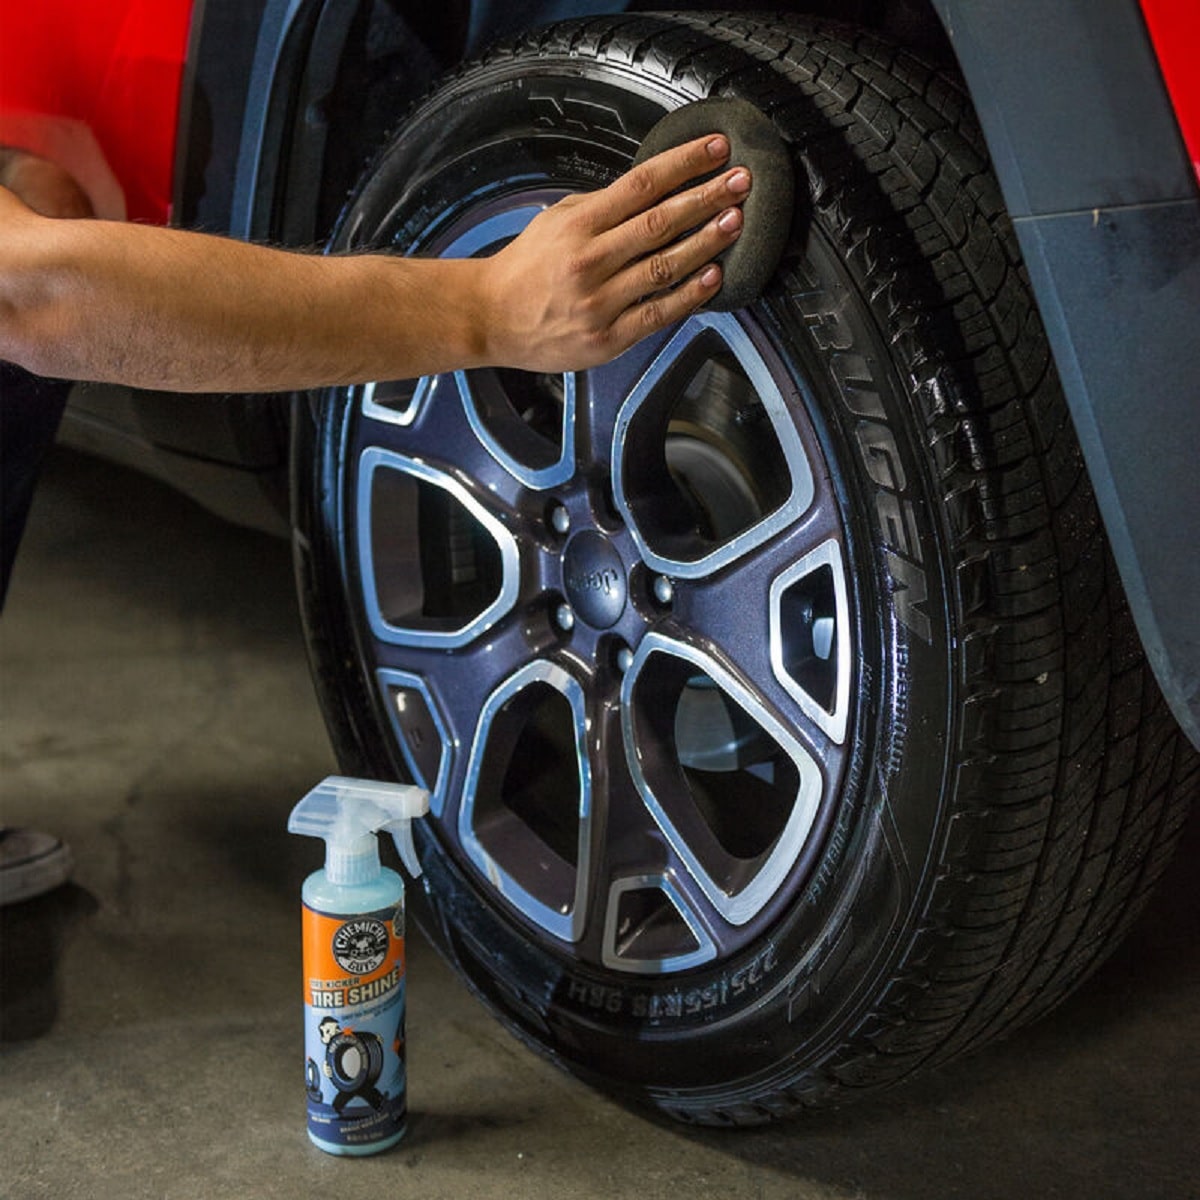 Should You Shine Your Car Tires?